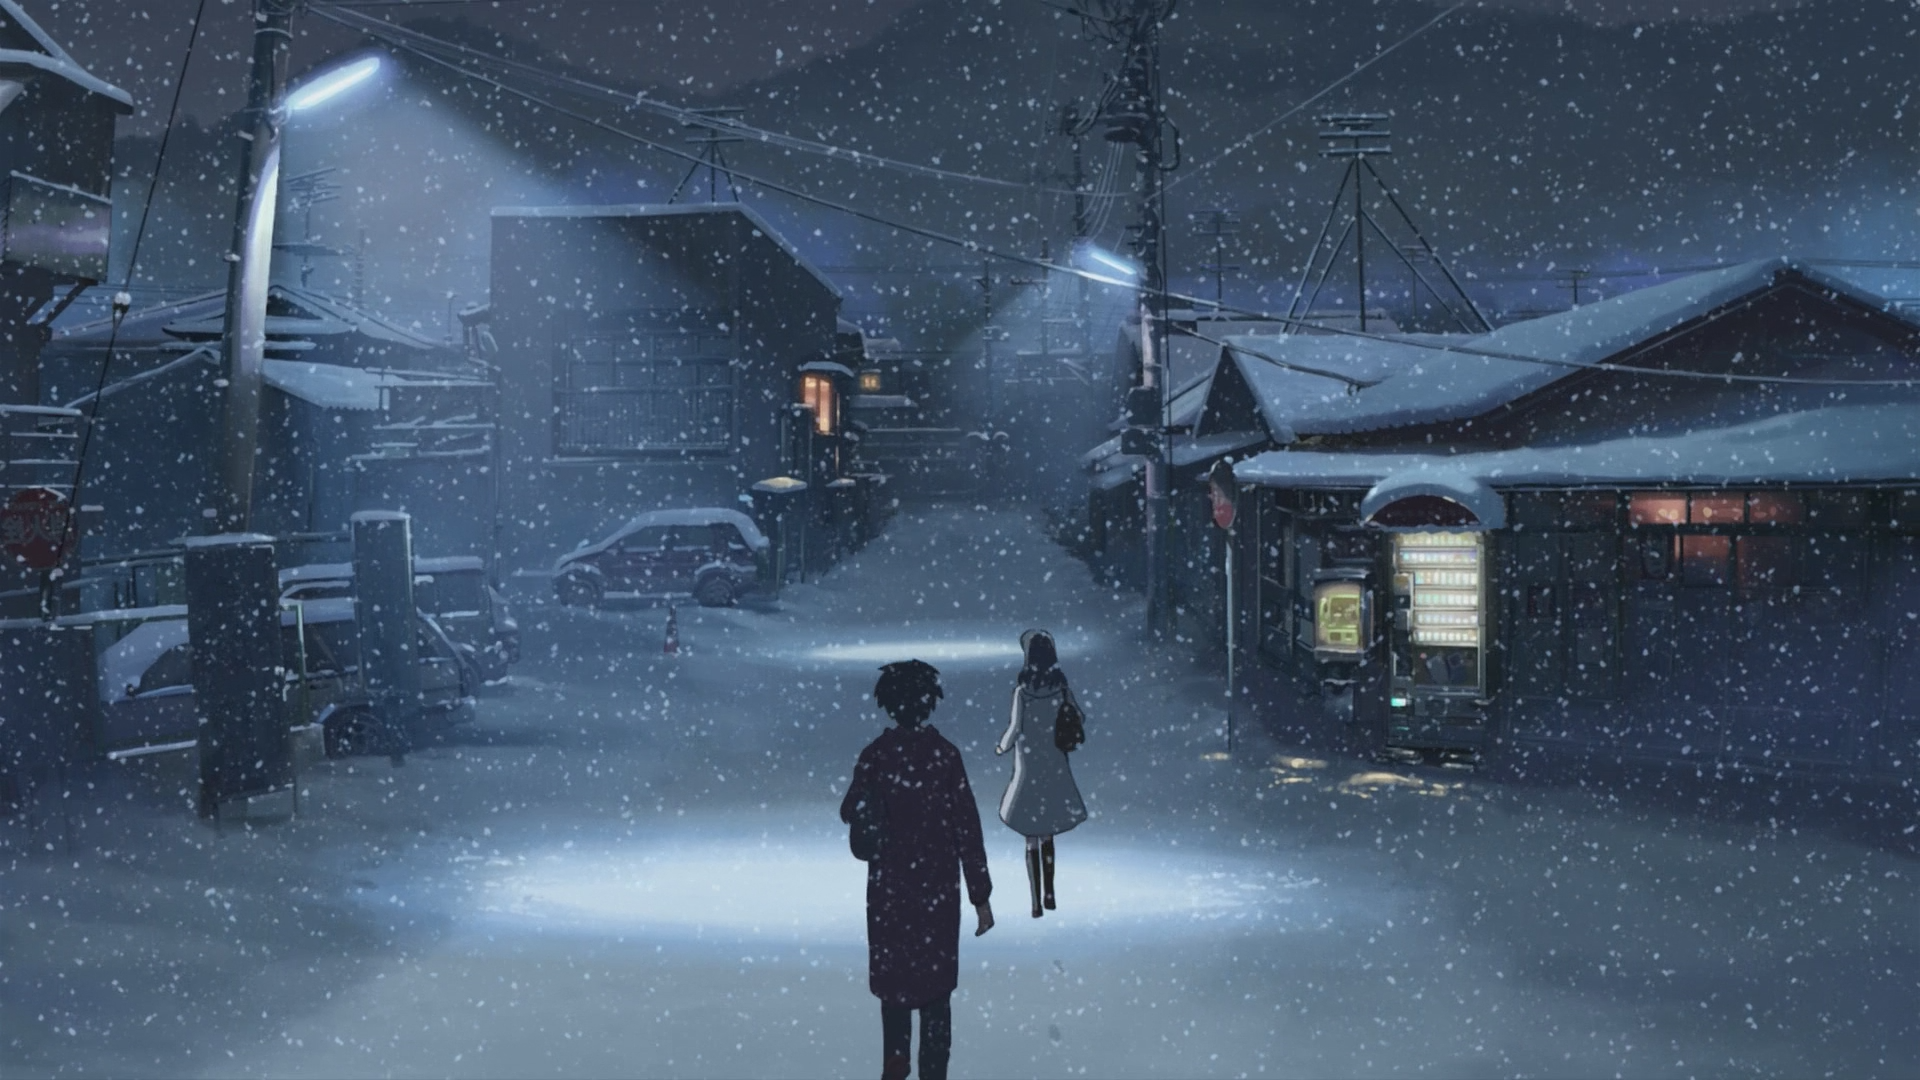  Centimeters Per Second Backgrounds